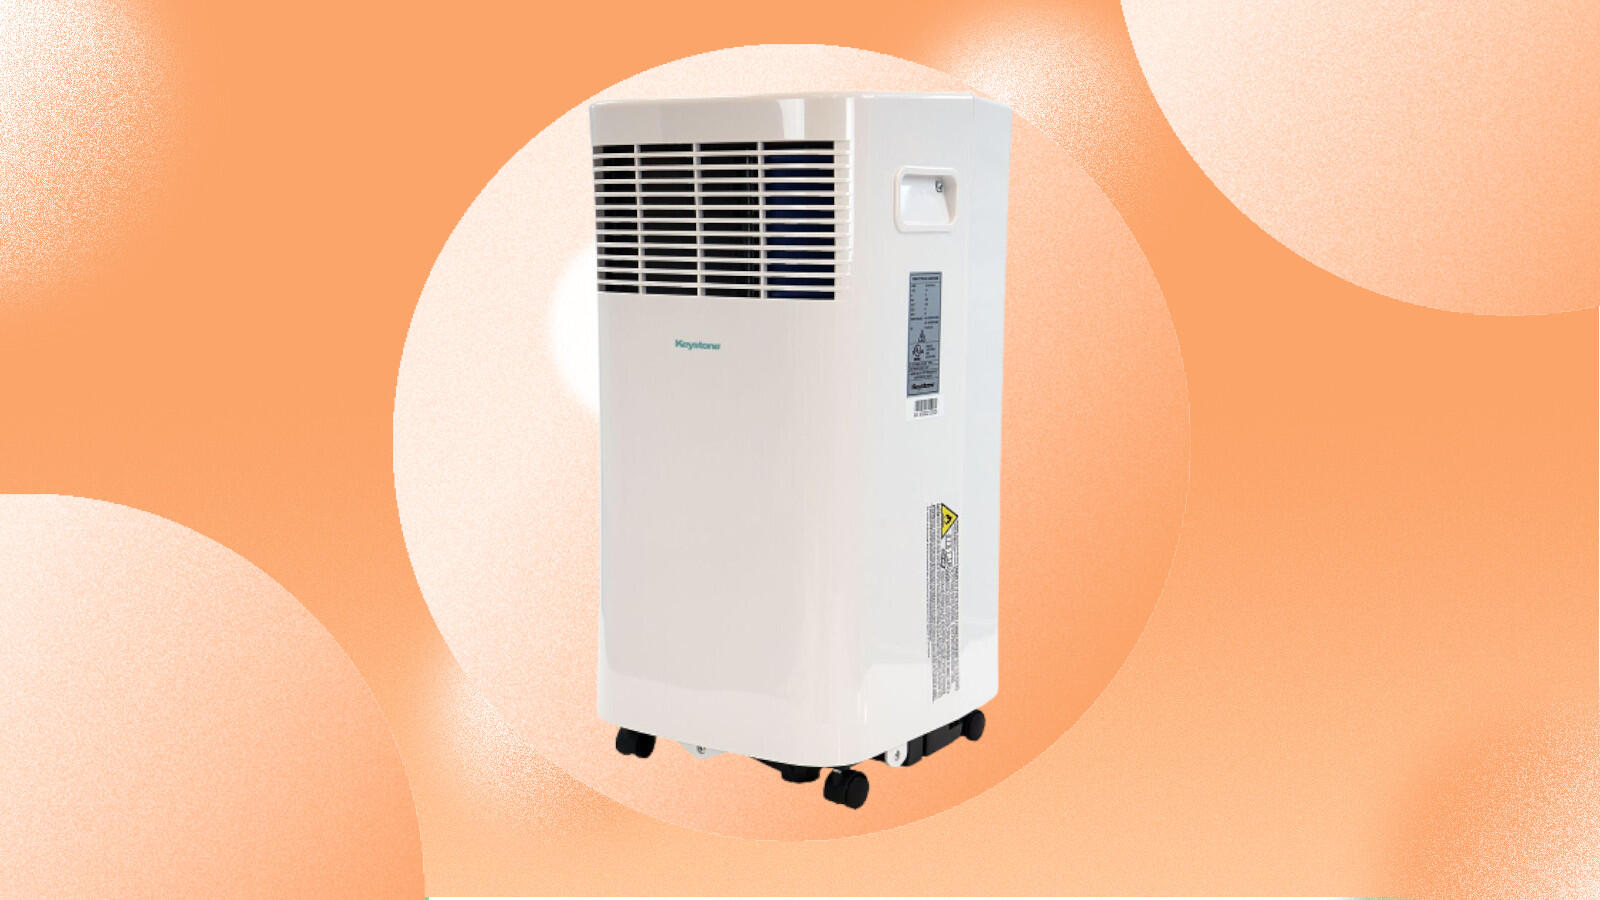 Up To 5% Off on Portable Air Conditioner